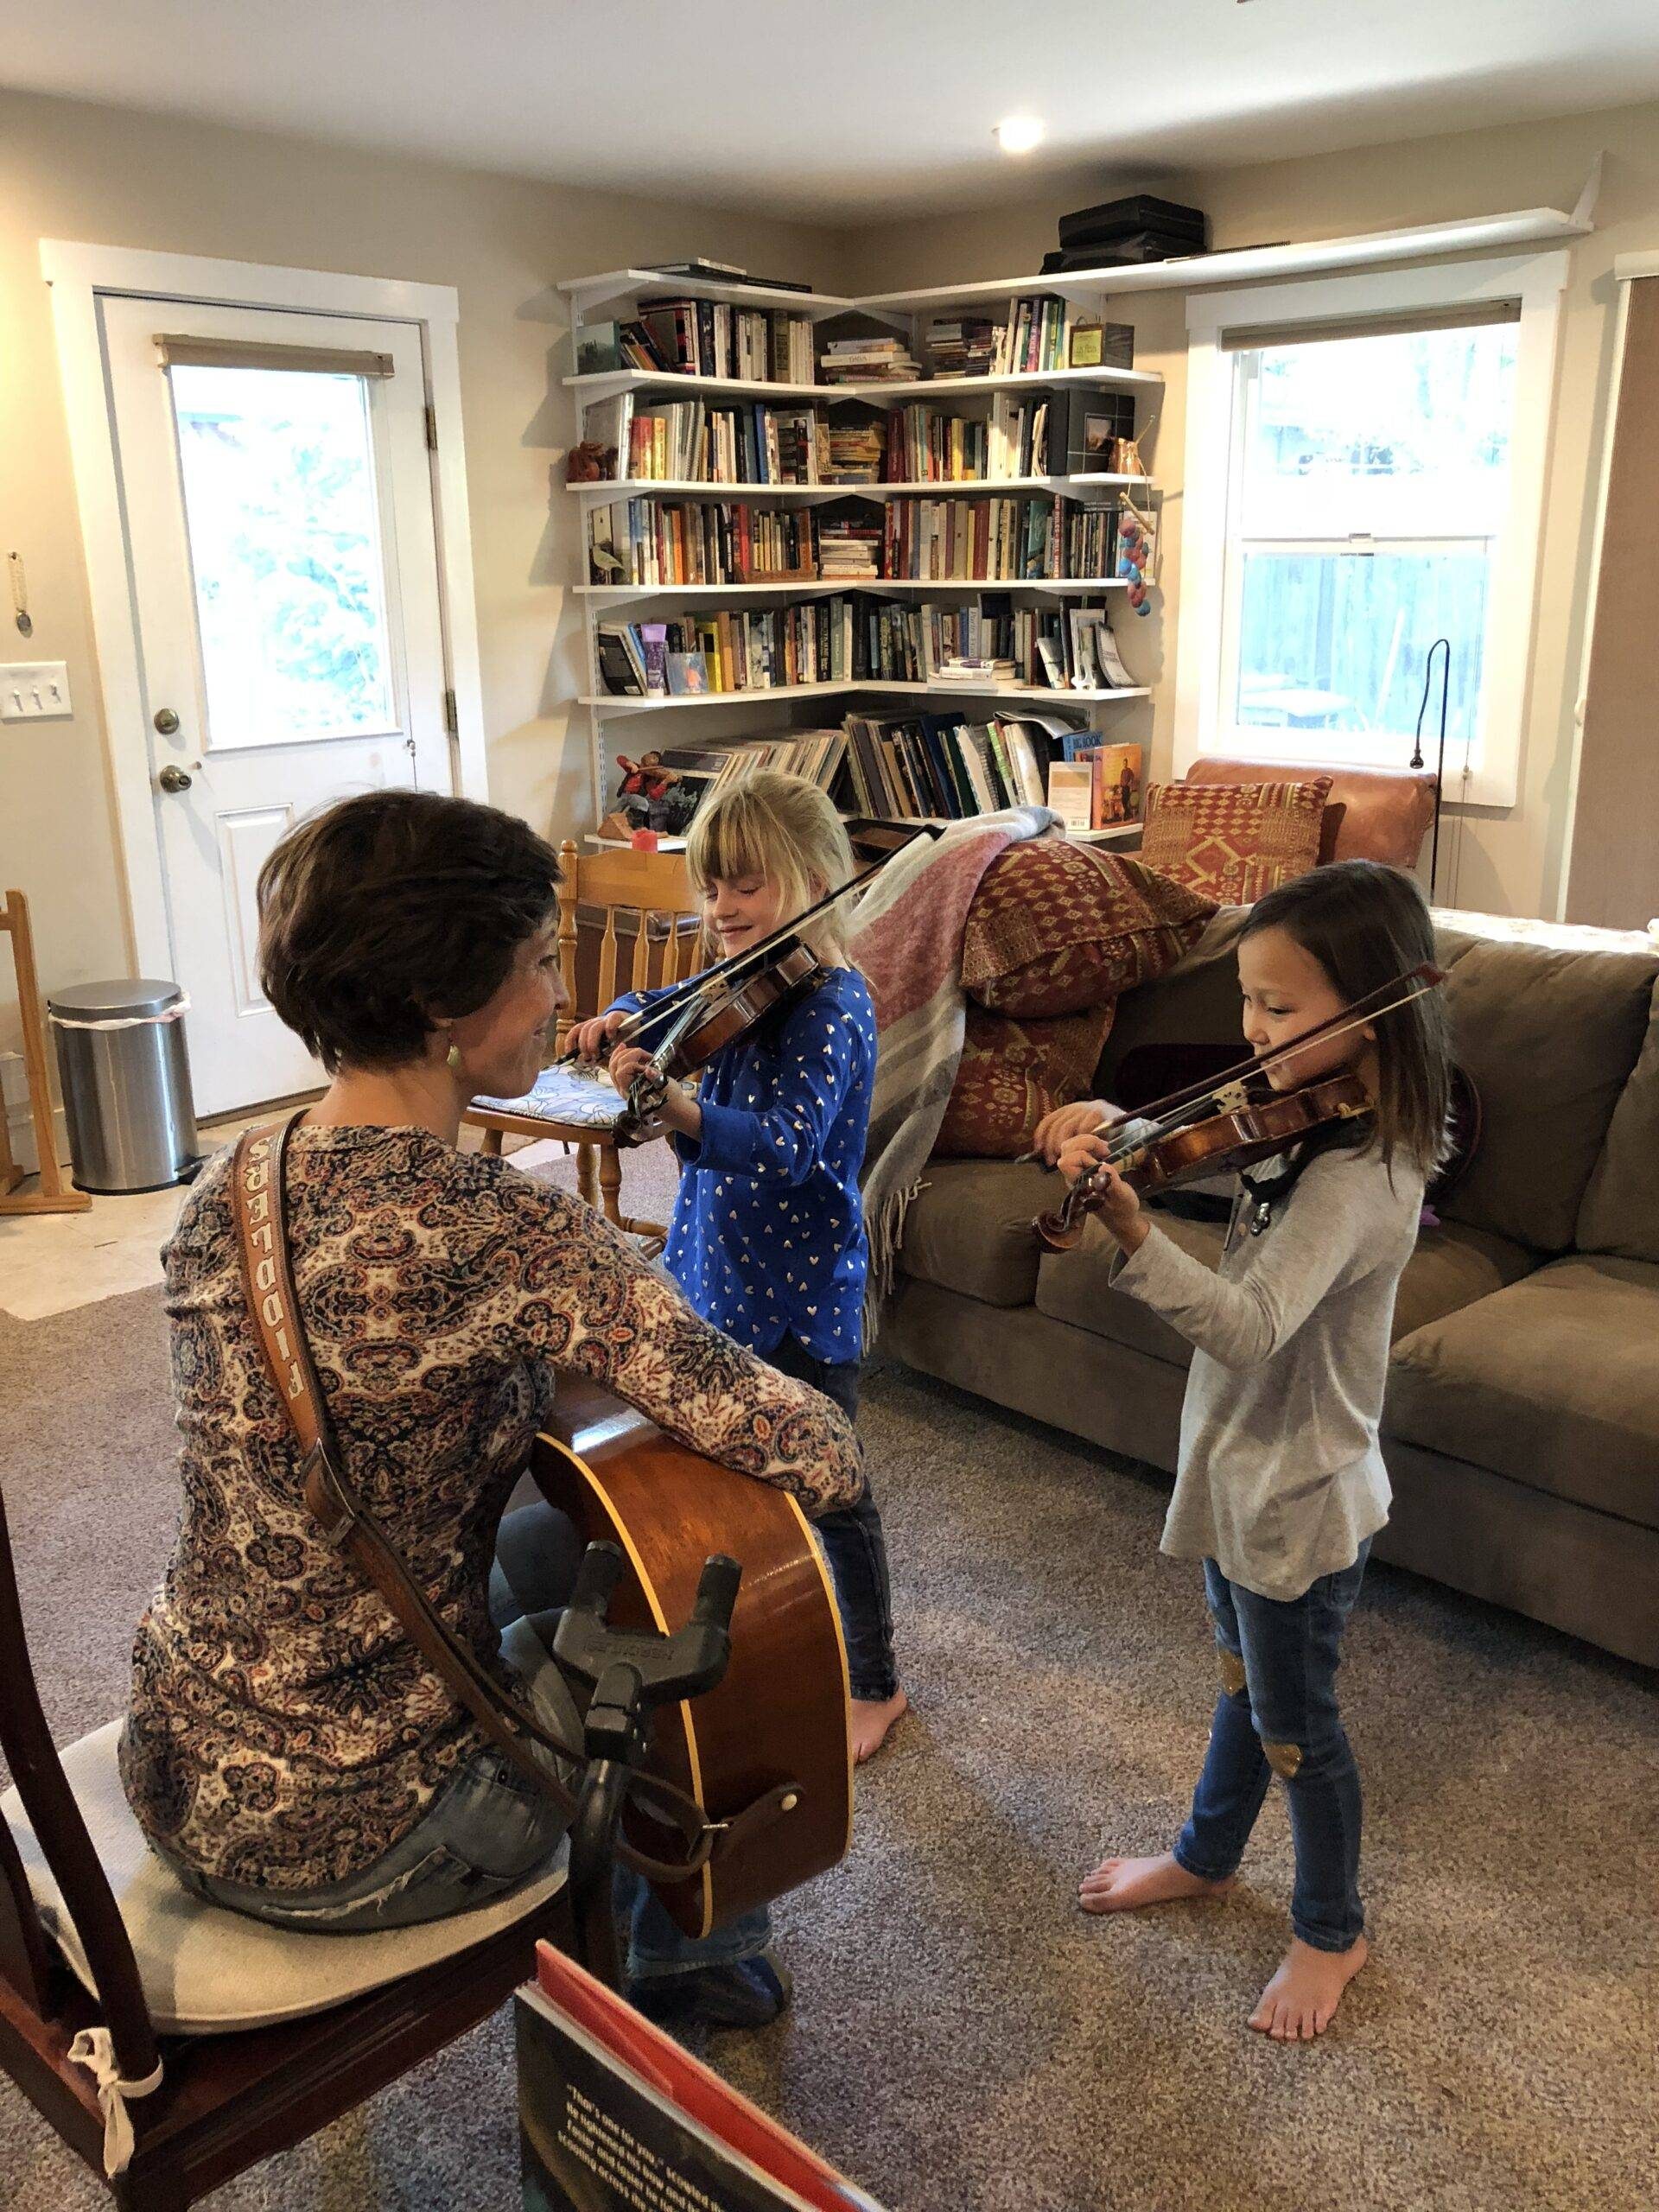 Back to School (kind of…): How Music Helps Your Kids Learn at Home